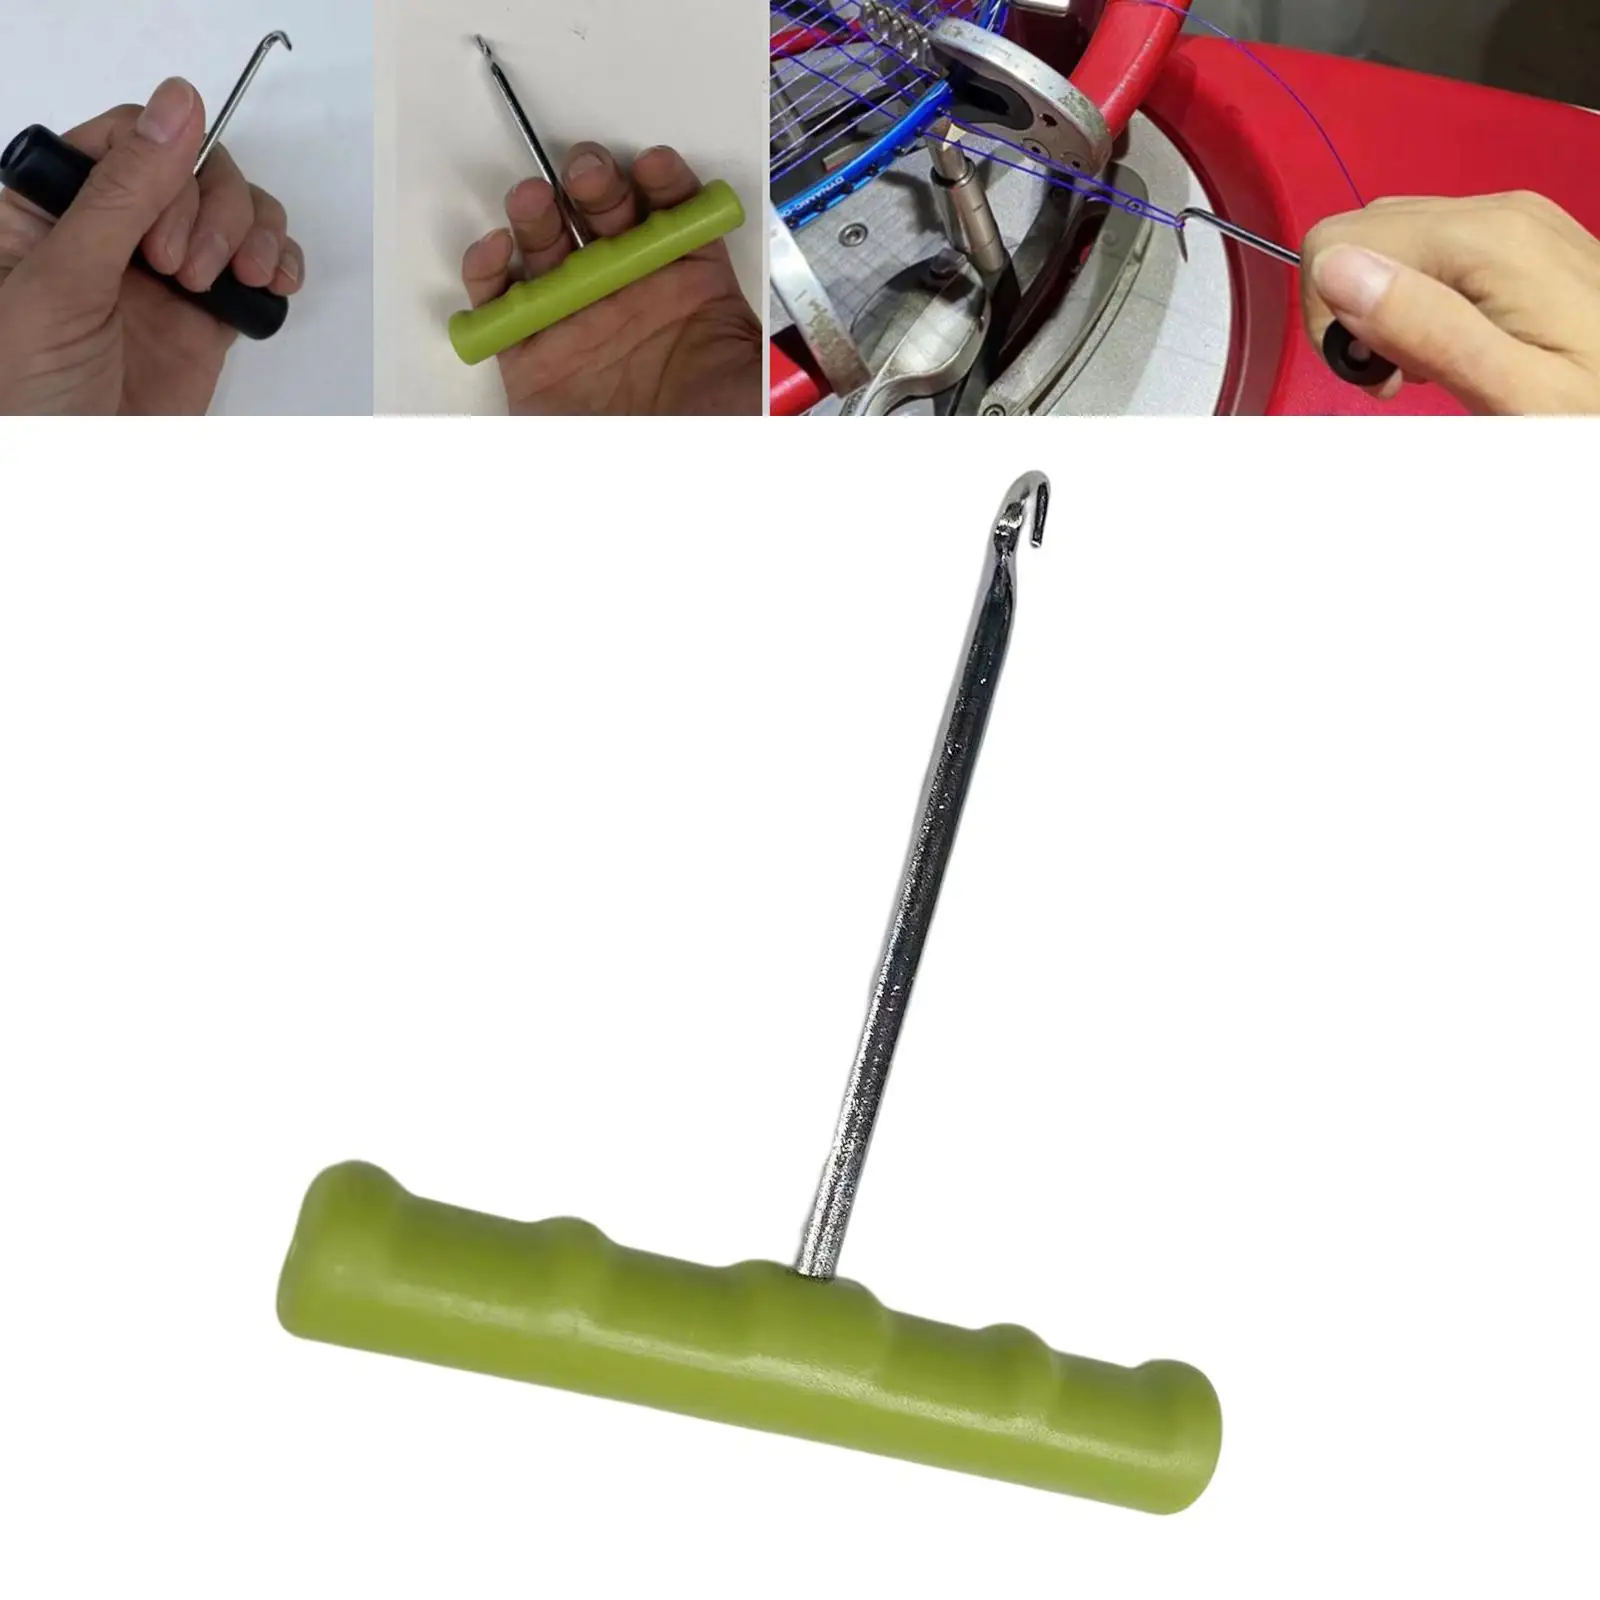 Premium Racket String Puller Racket Stringing Tool Easy to Use Replace Parts for Badminton Squash Tennis Racquet